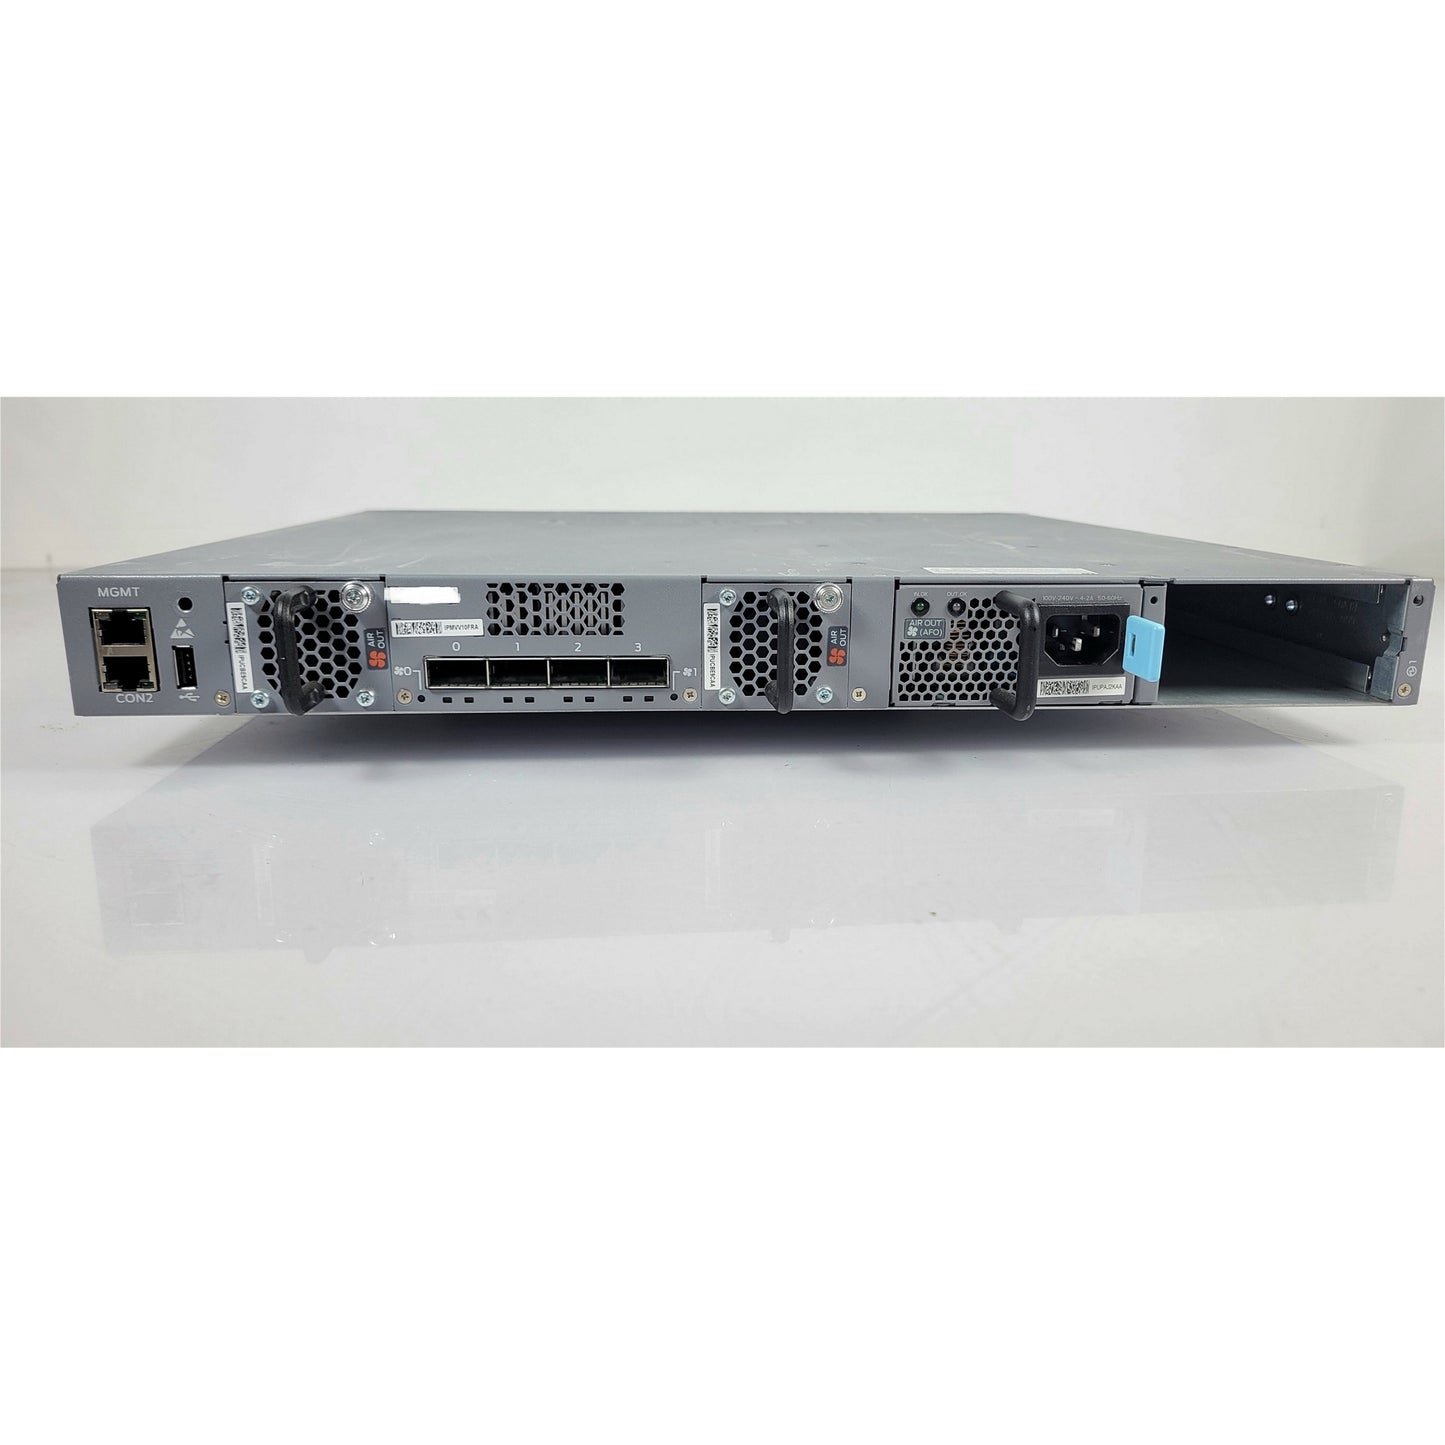 EX4300, 48-port 10/100/1000BaseT Front-to-Back airflow (Used - Good)